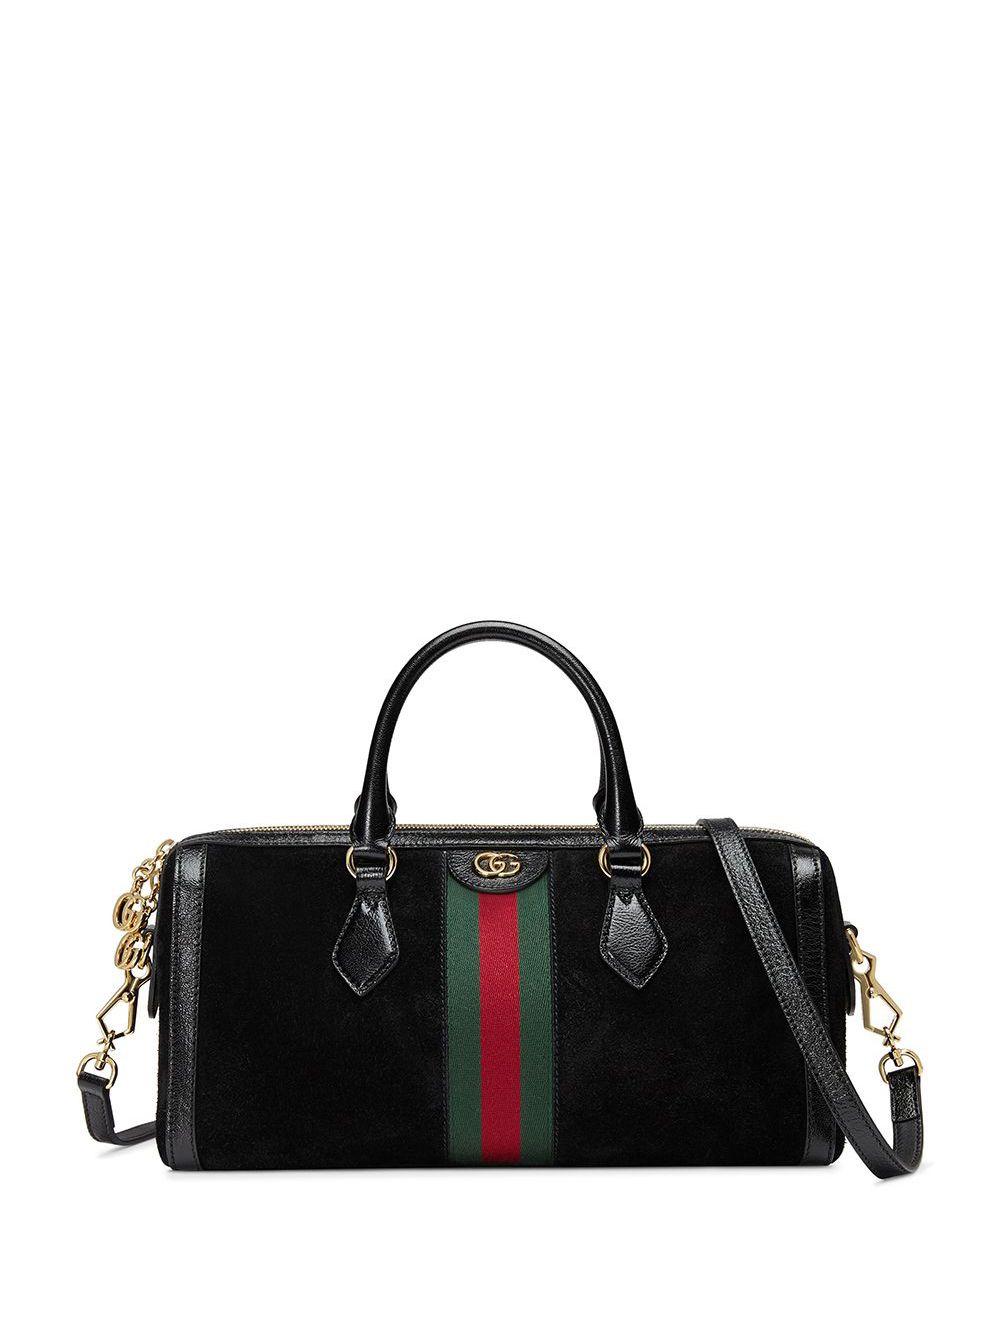 Gucci Ophidia Boston Suede Bowling Bag in Black Suede (Black) - Save 19 ...